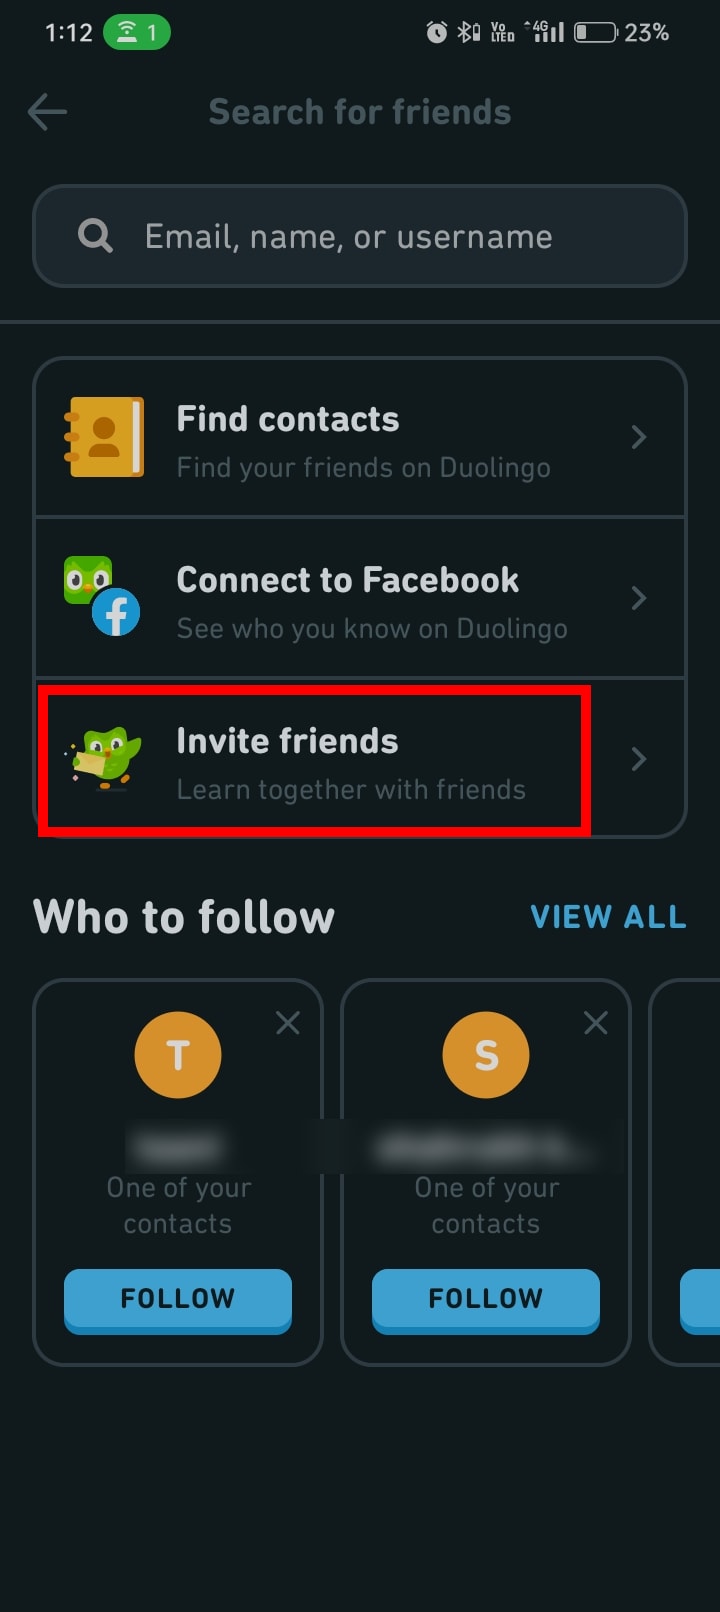 Among the four options, tap on Invite friends.